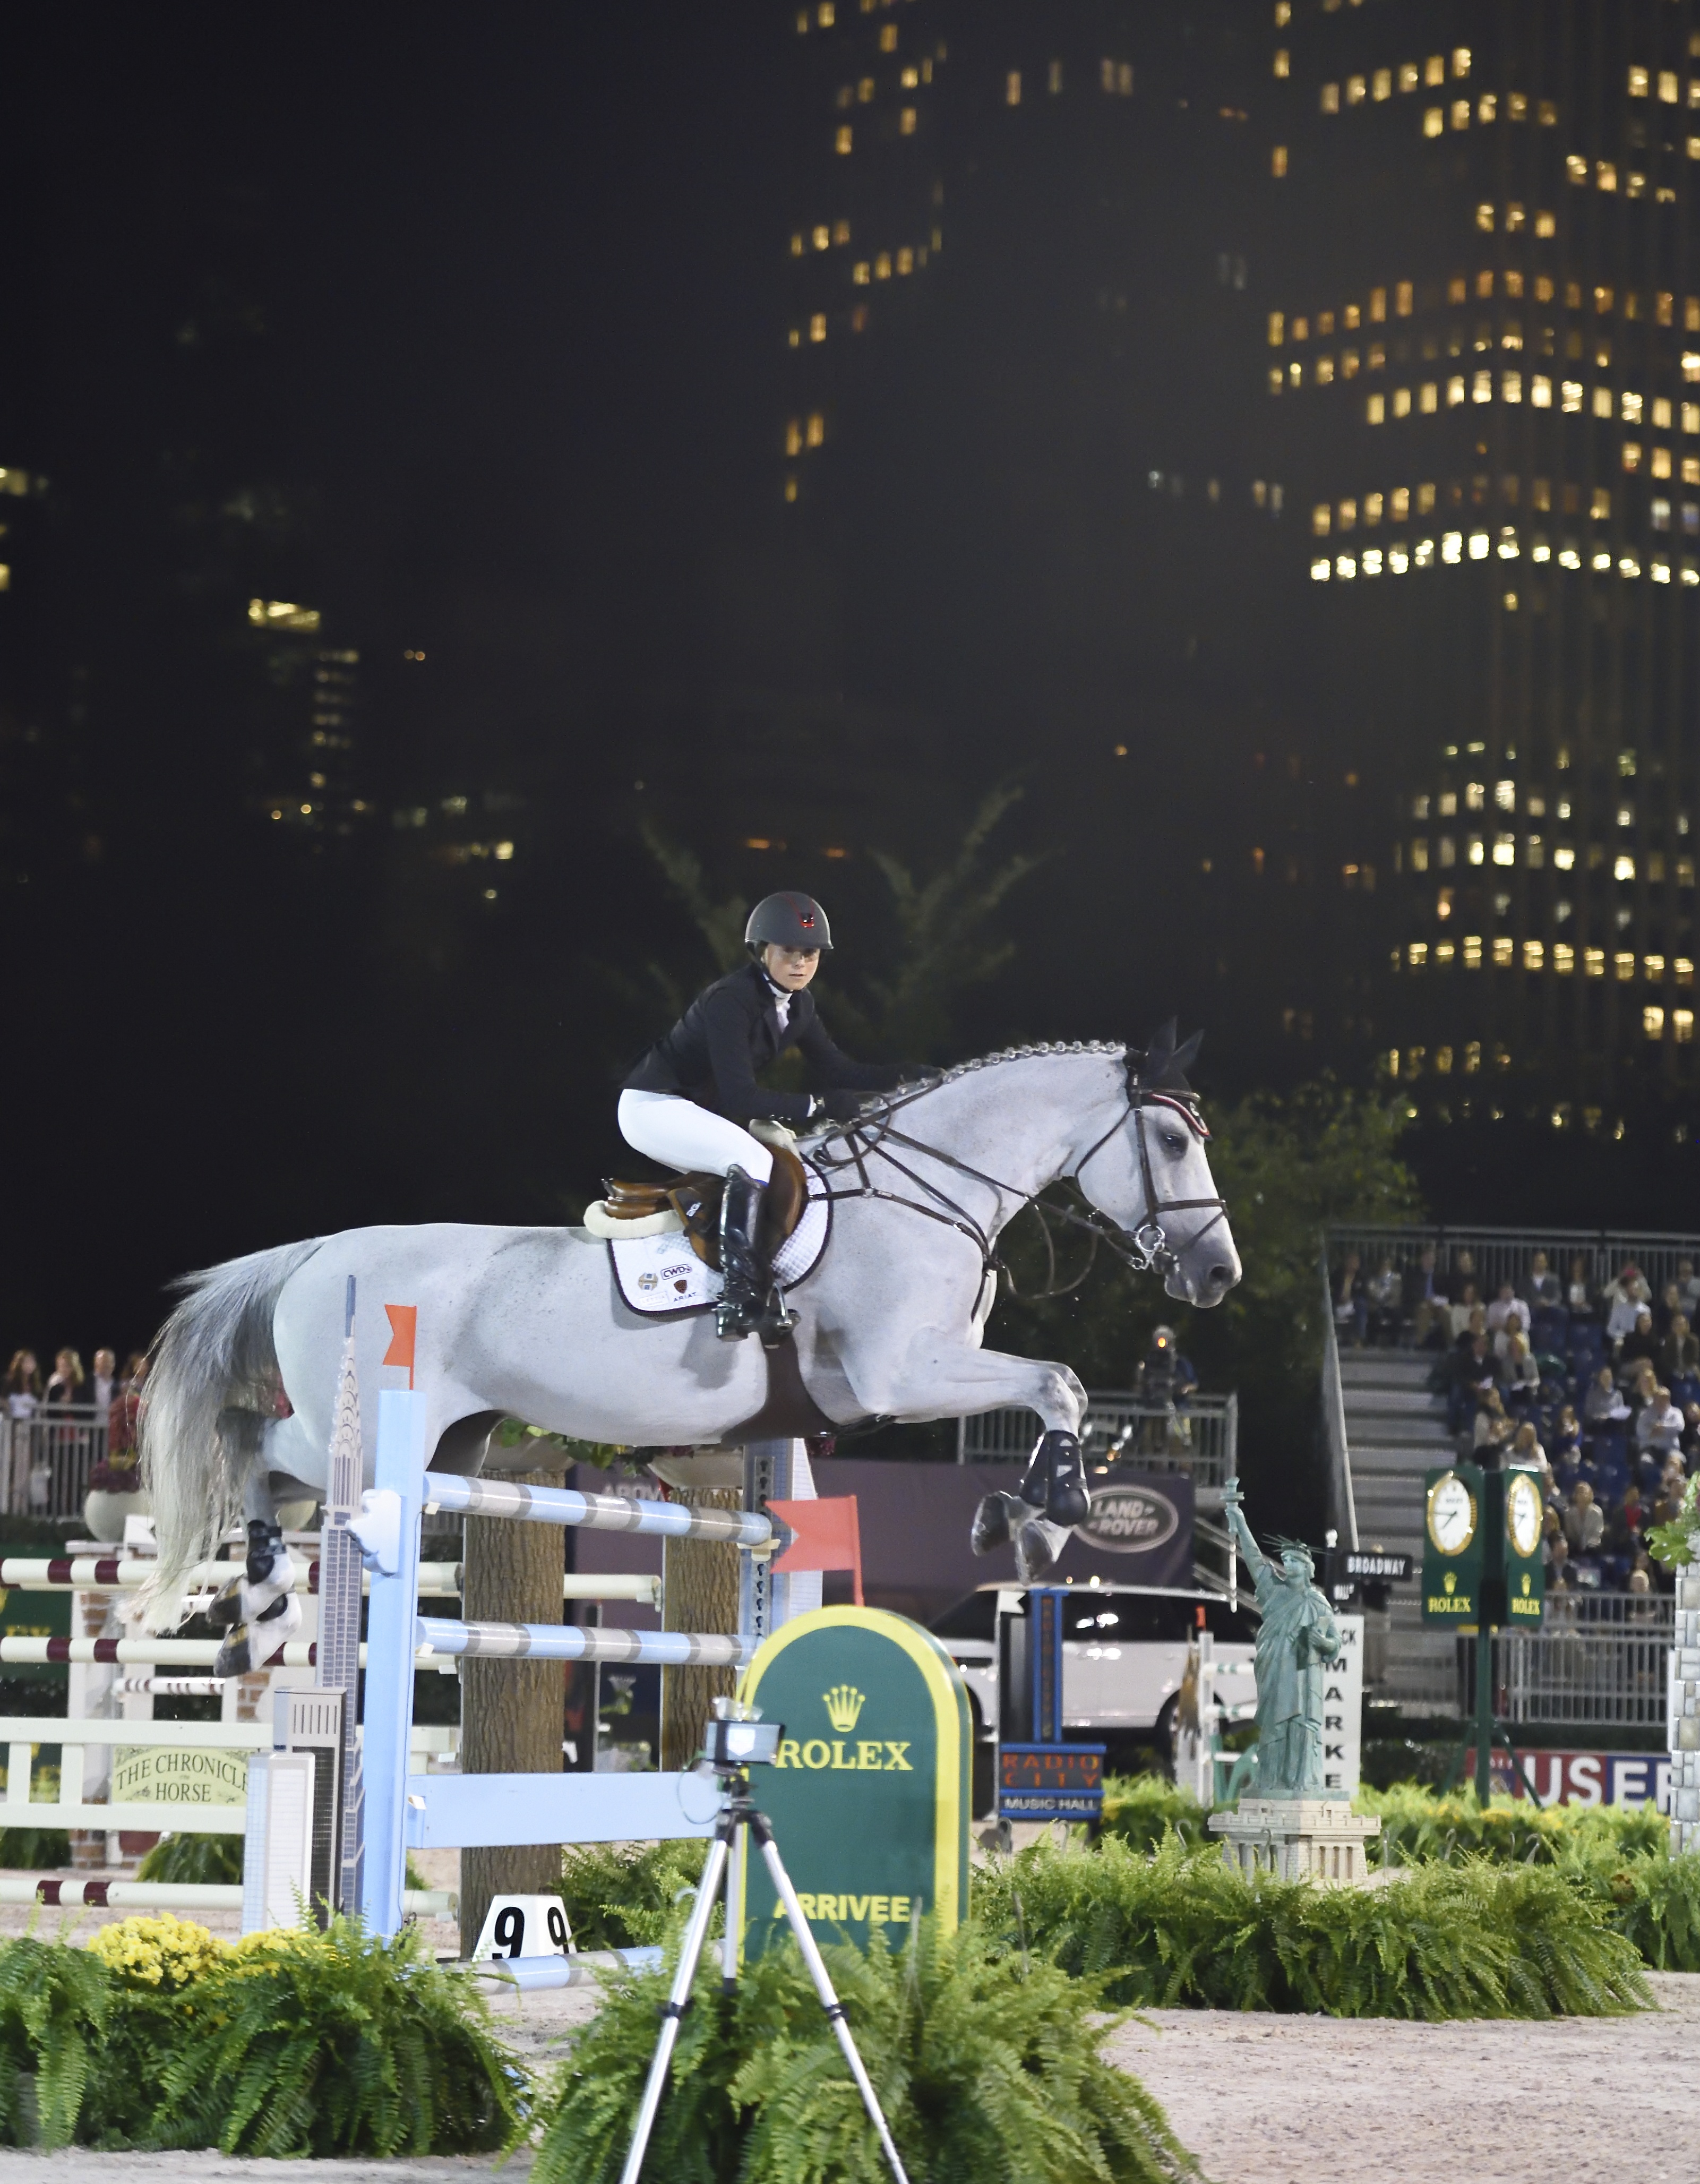 Stage is Set for Inaugural U.S. Open Show Jumping at Rolex Central Park